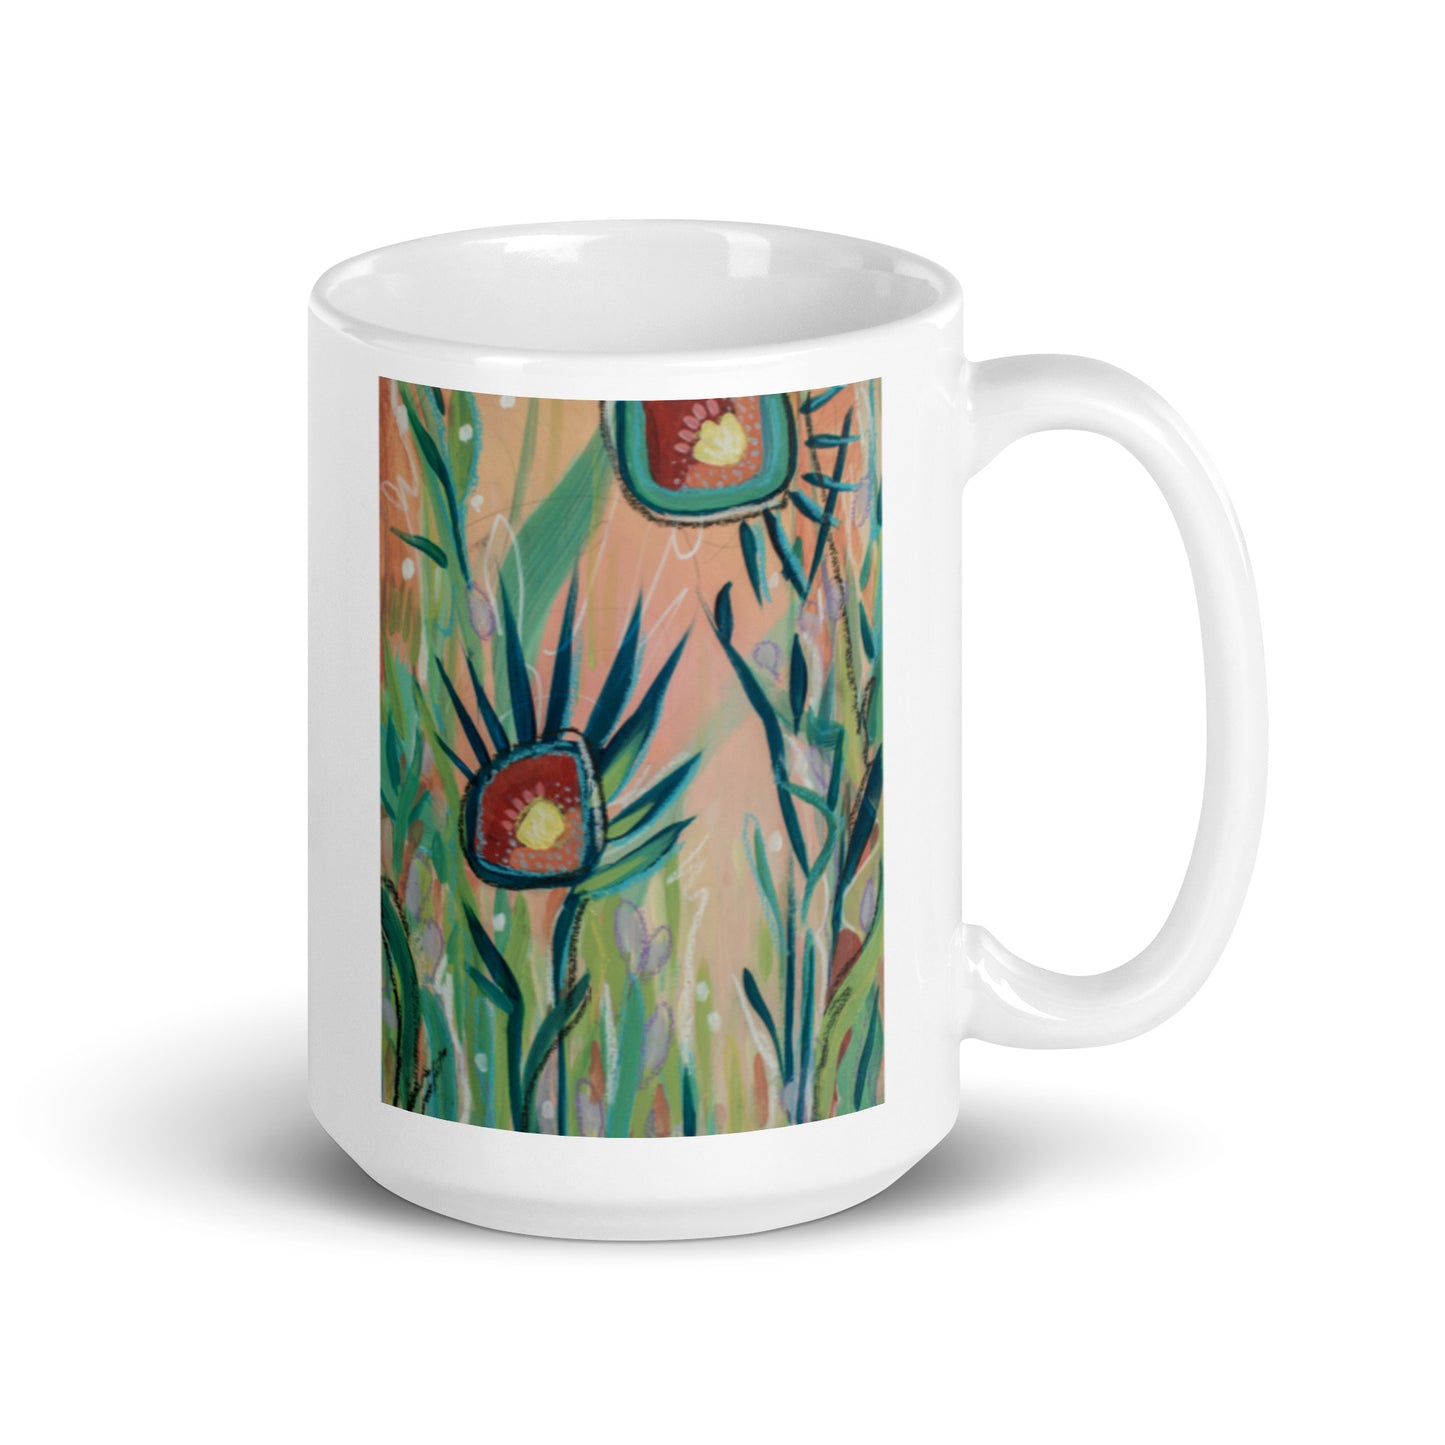 Footsteps in the distance, White glossy mug